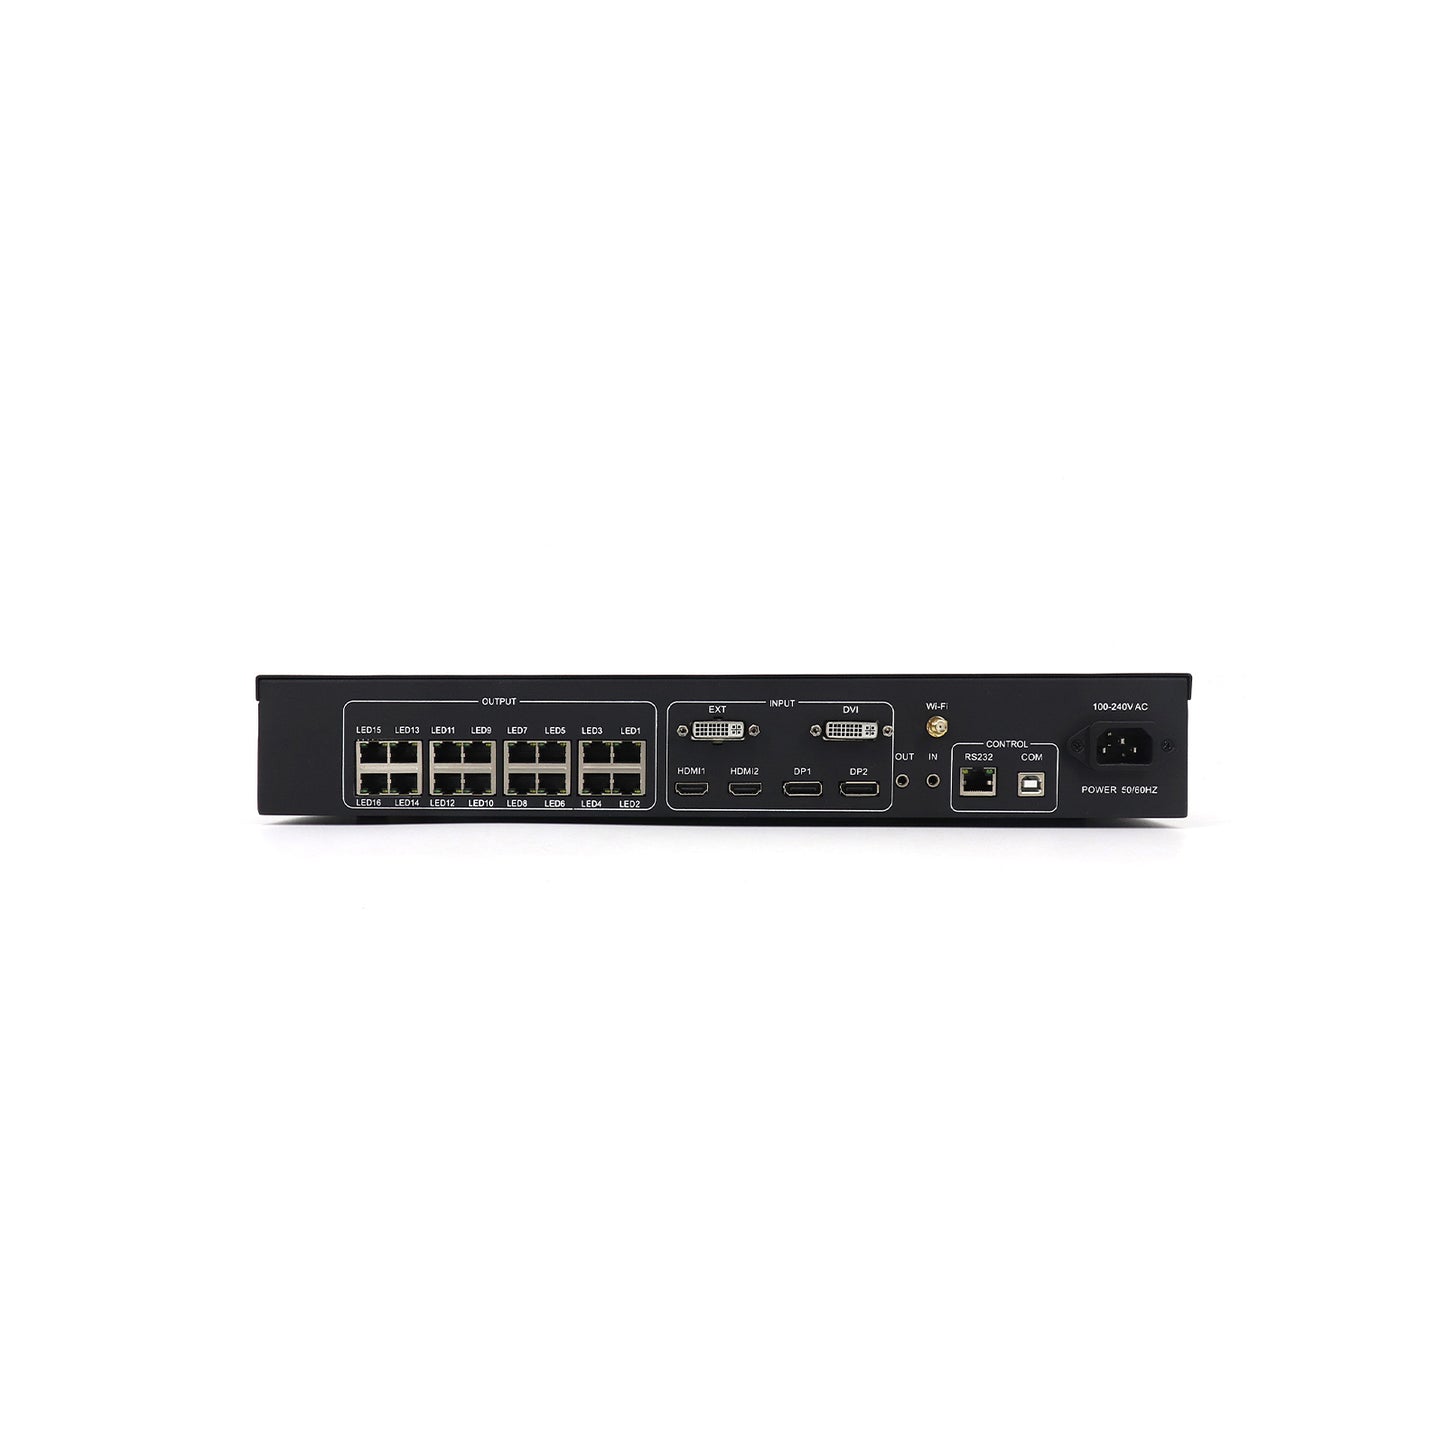 HD-VP1640 All-in-one LED Video Processor